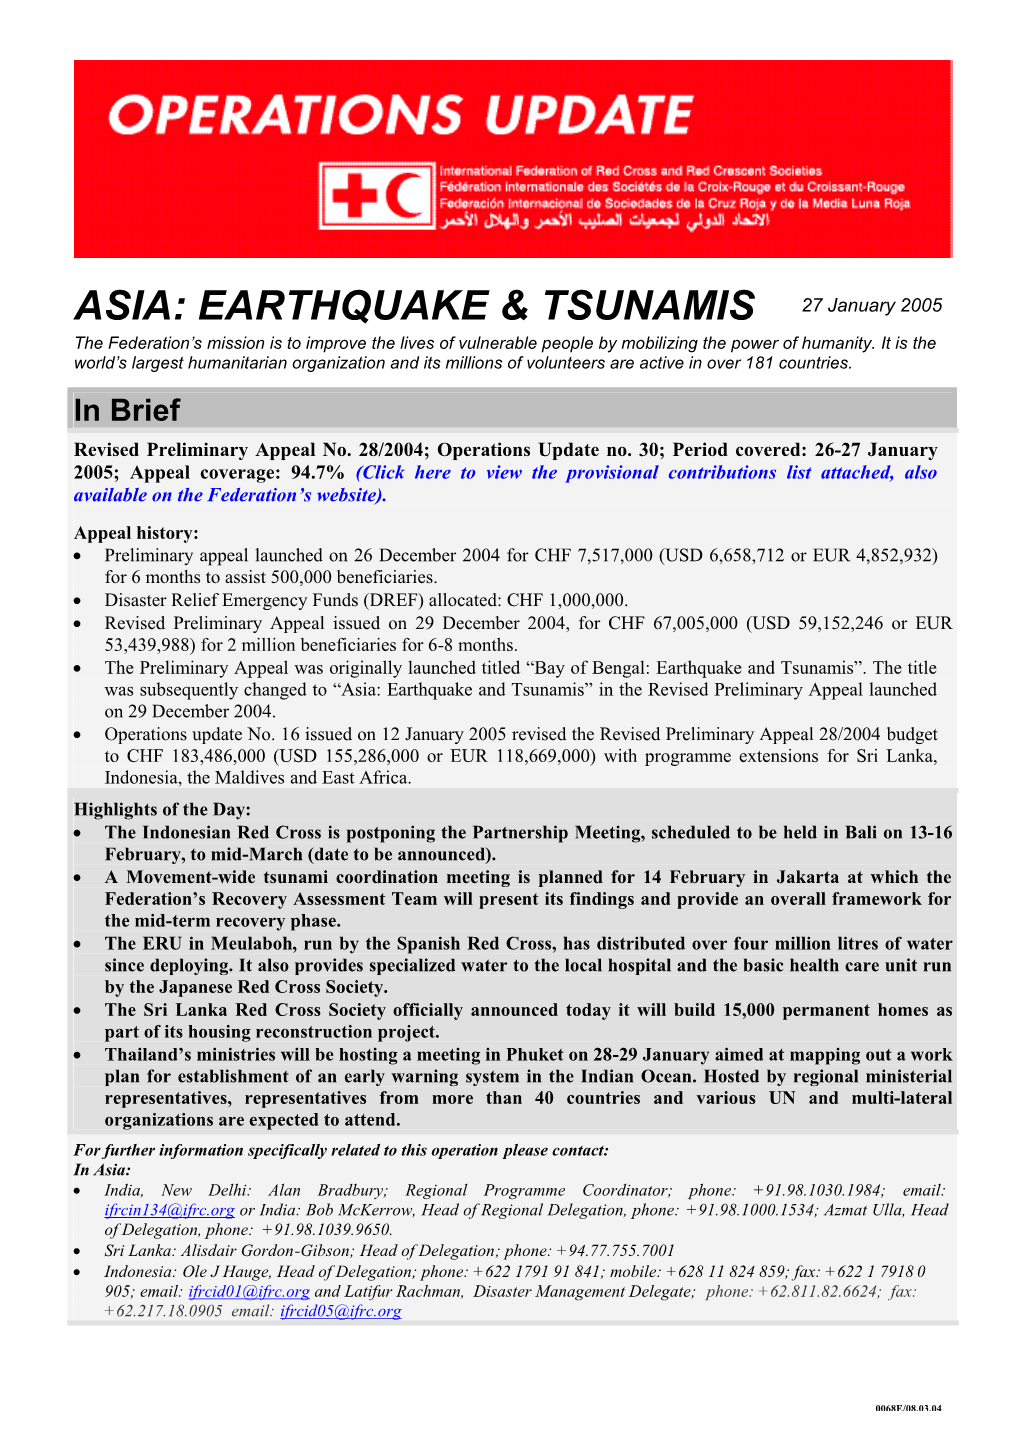 ASIA: EARTHQUAKE & TSUNAMIS 27 January 2005 the Federation’S Mission Is to Improve the Lives of Vulnerable People by Mobilizing the Power of Humanity